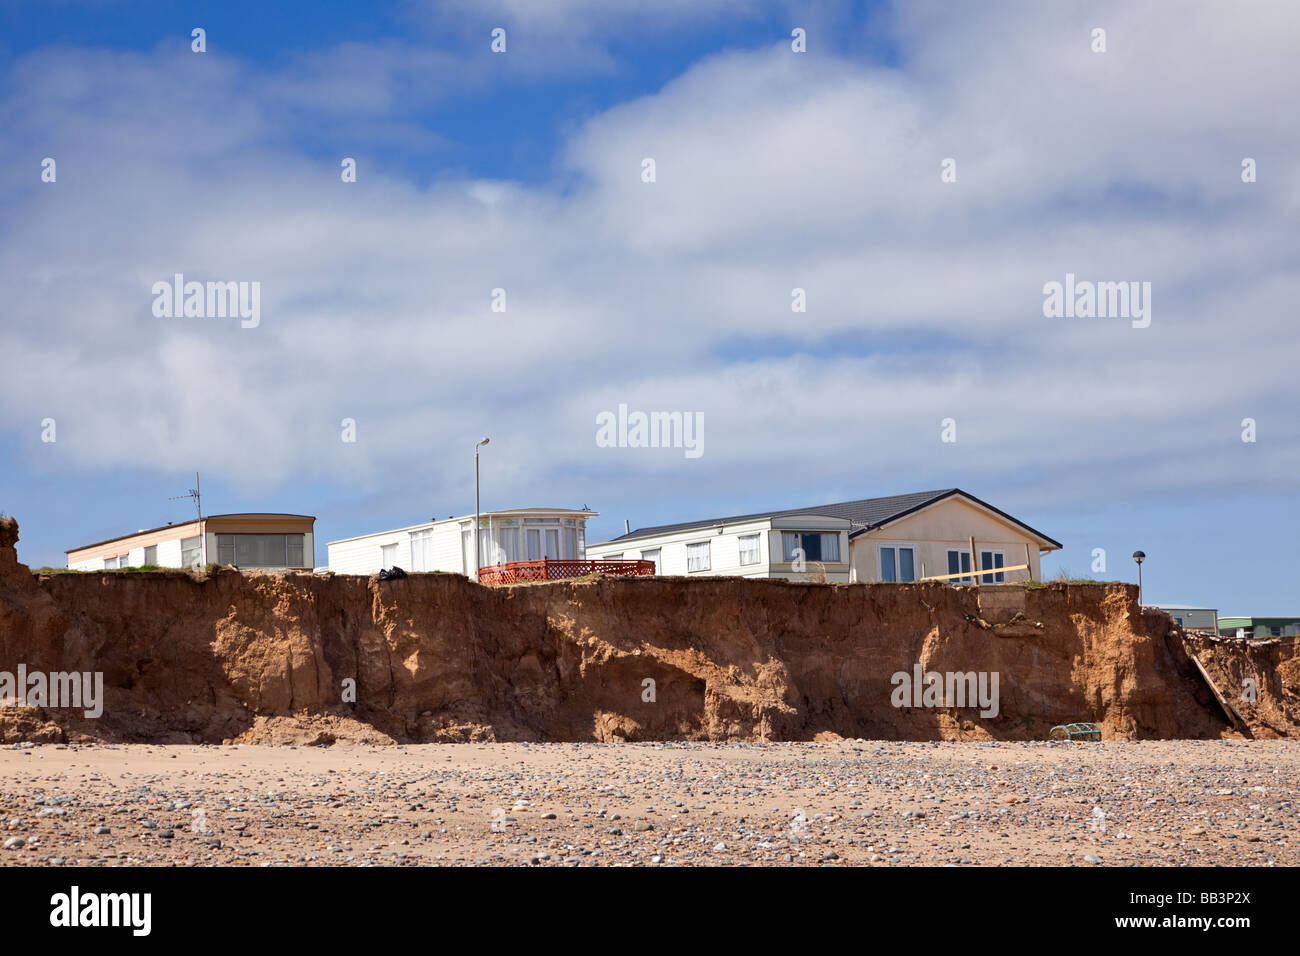 Holiday homes in danger from North Sea coastal erosion on the cliffs of the Holderness Coast, Easington, Yorkshire UK Stock Photo